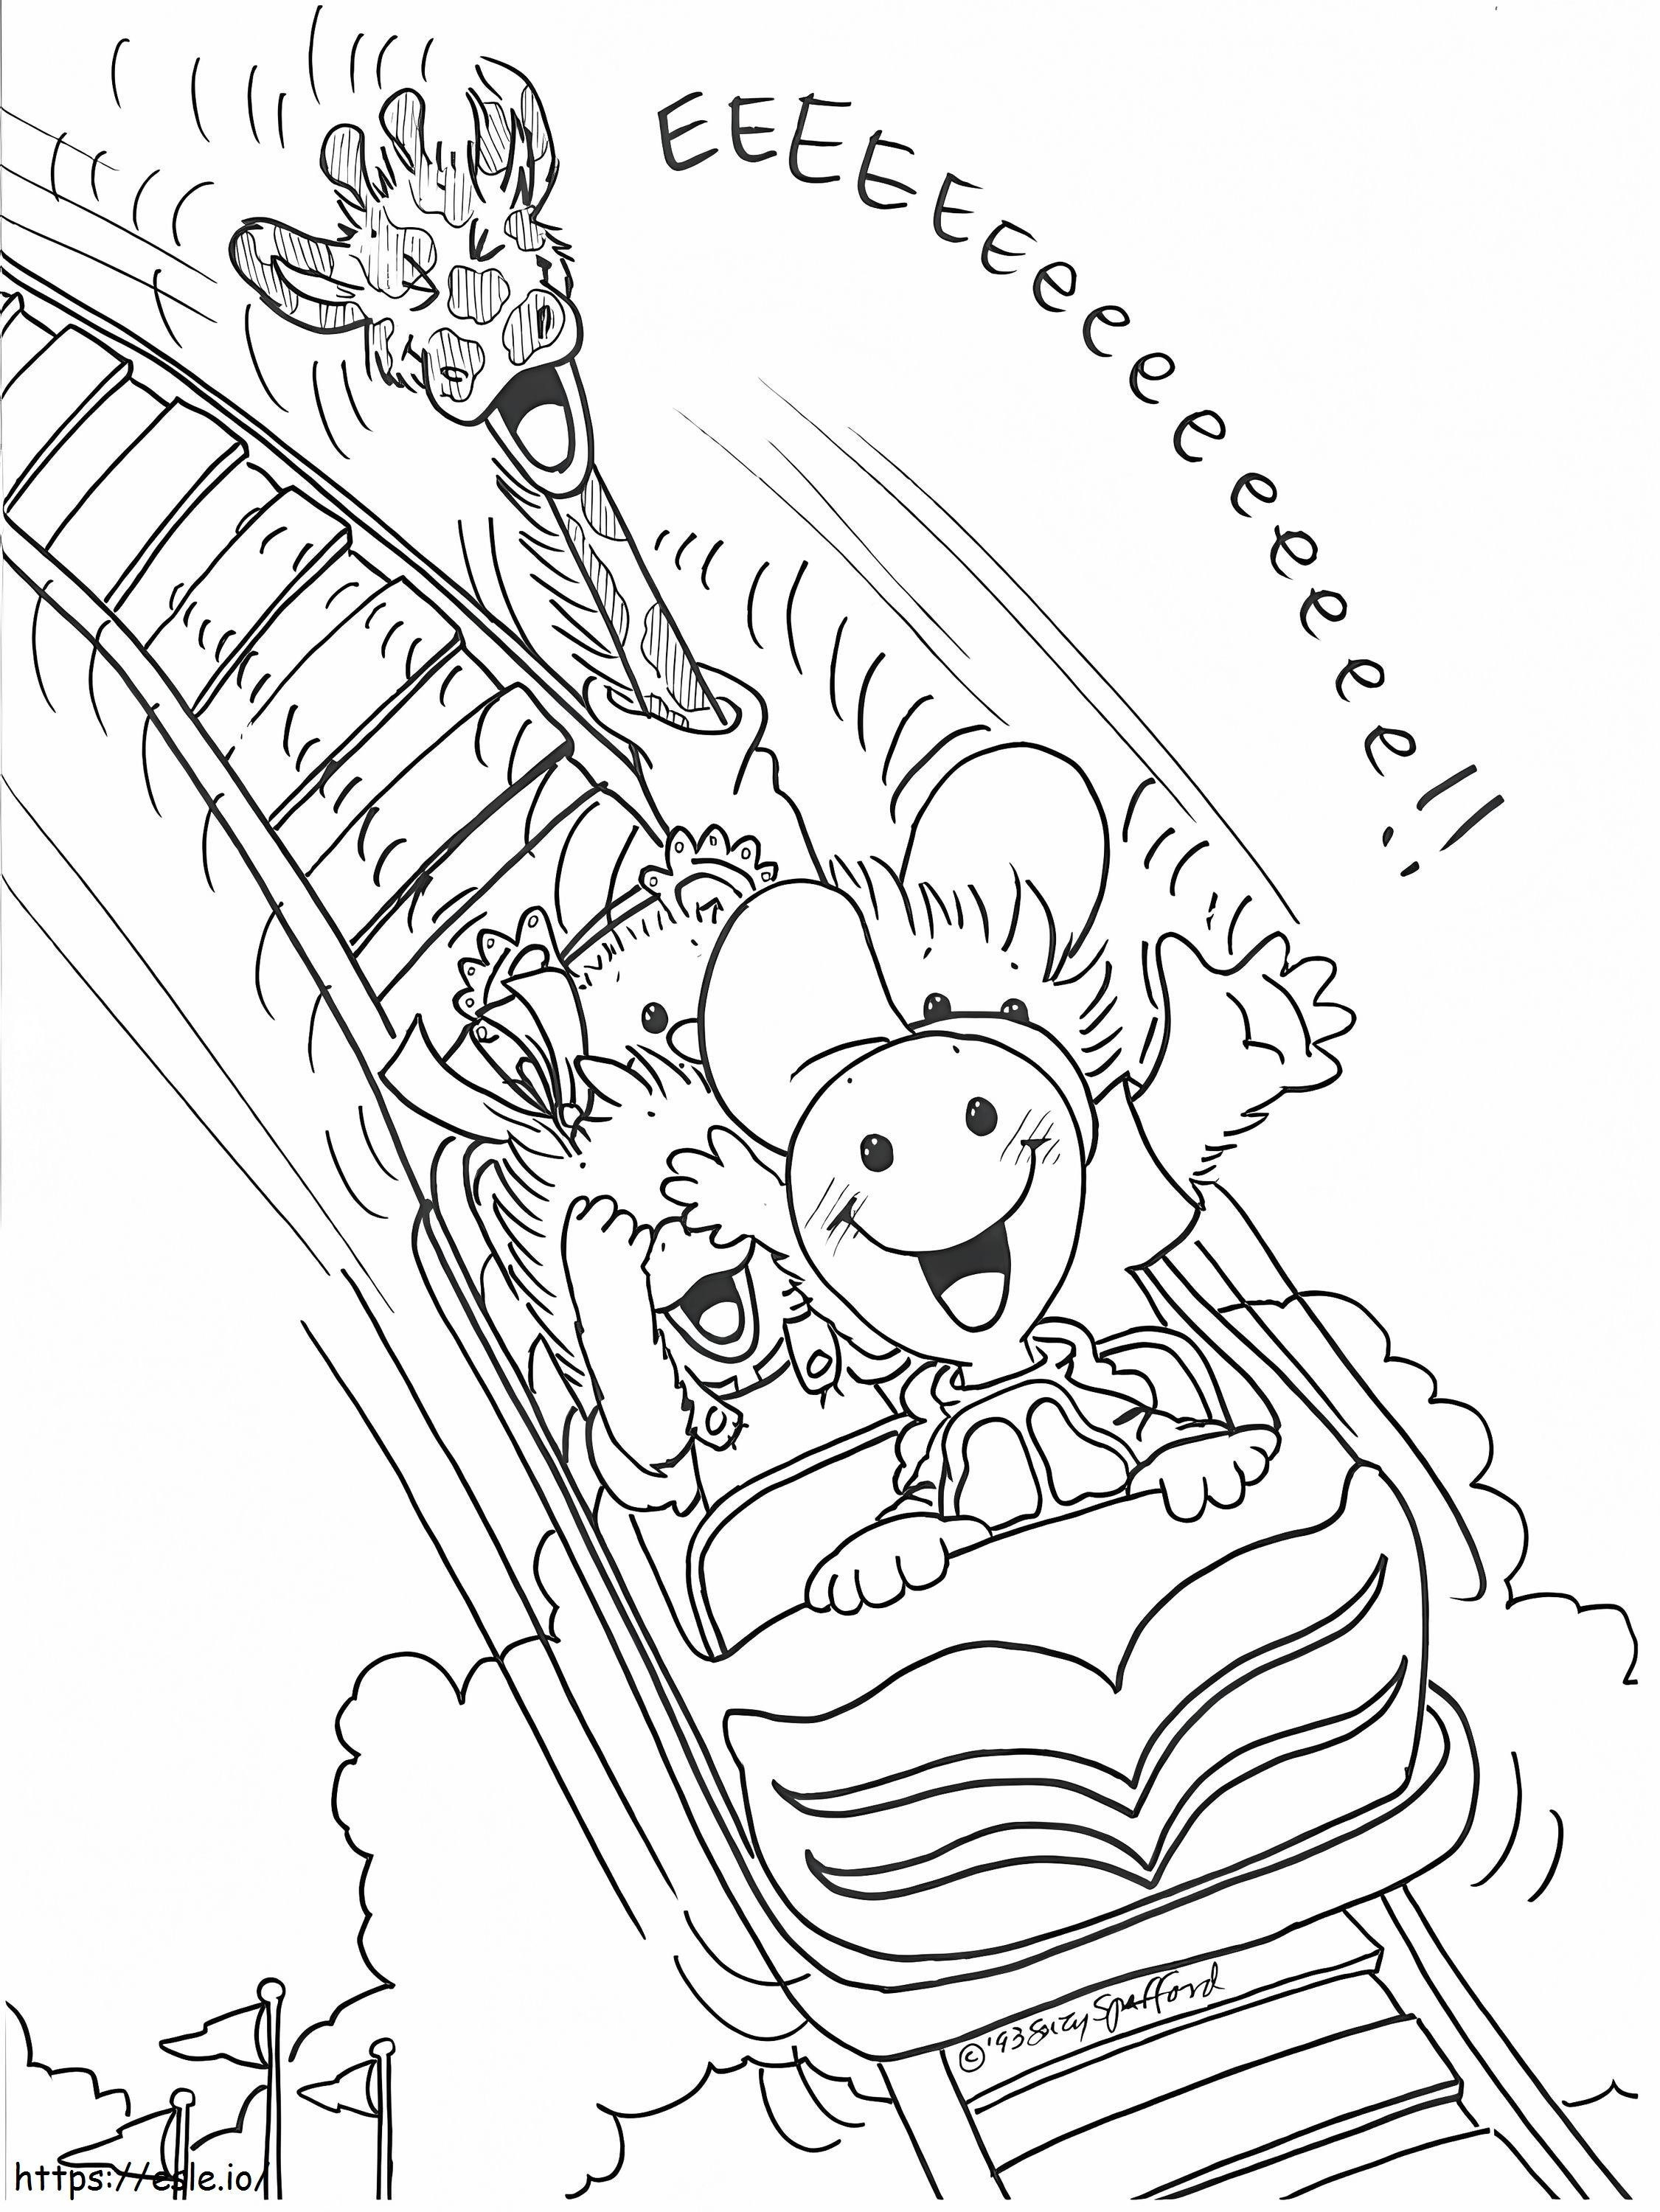 Amazing Roller Coaster coloring page